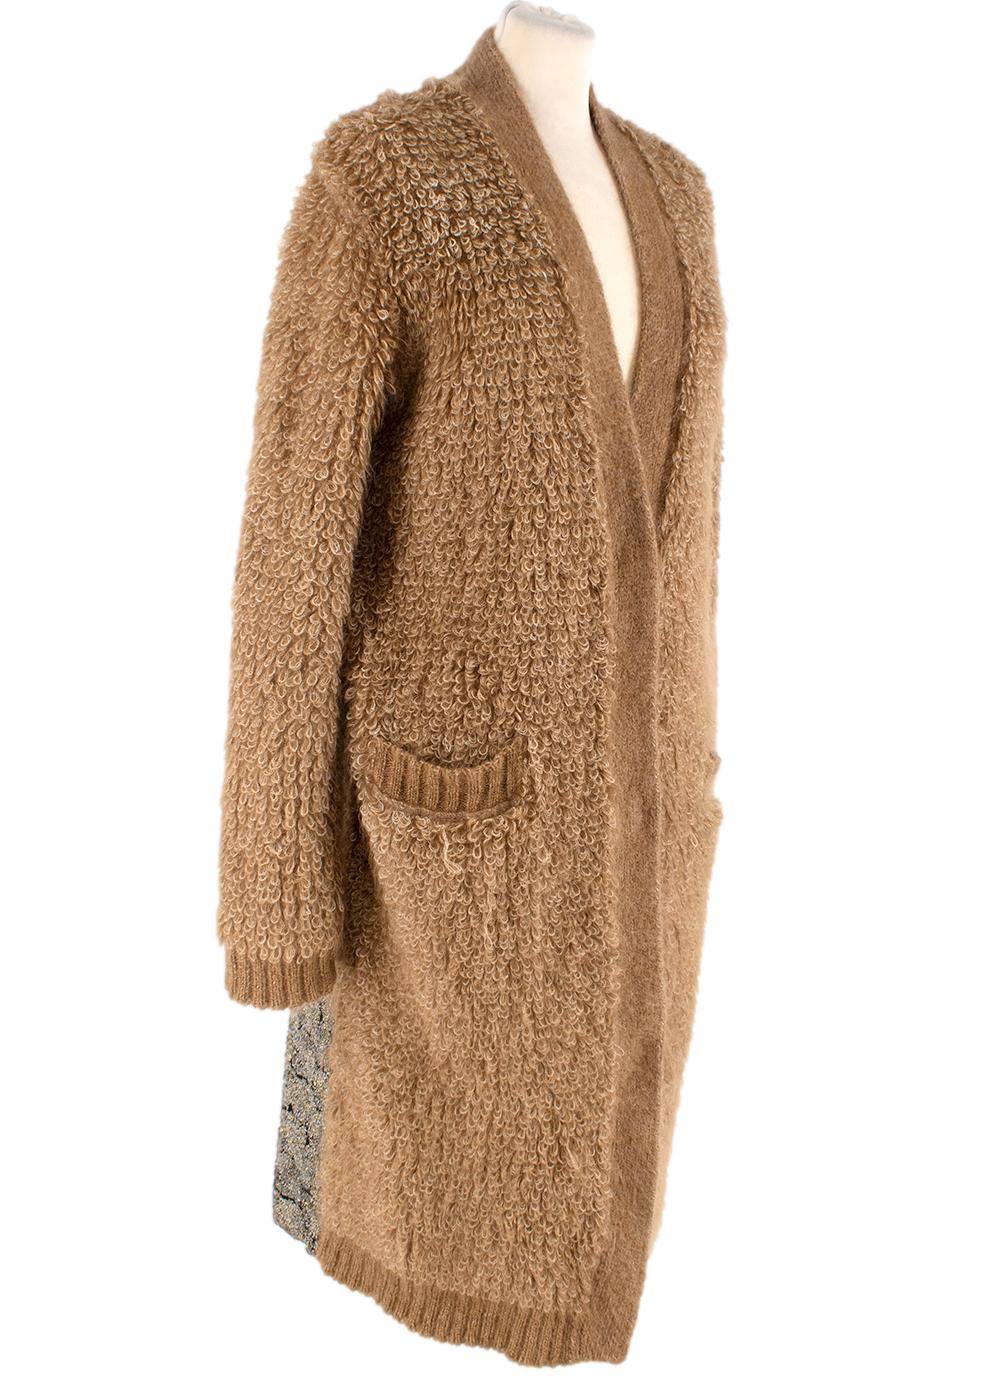 Rochas Mohair Blend Contrast Jacquard Back Knit Coat

-This knitted mohair coat features two patch pockets 
-Shawl lapel 
-concealed button closure 
-The back features a contrasting metallic jacquard panel that really brings the coat alive.
-A